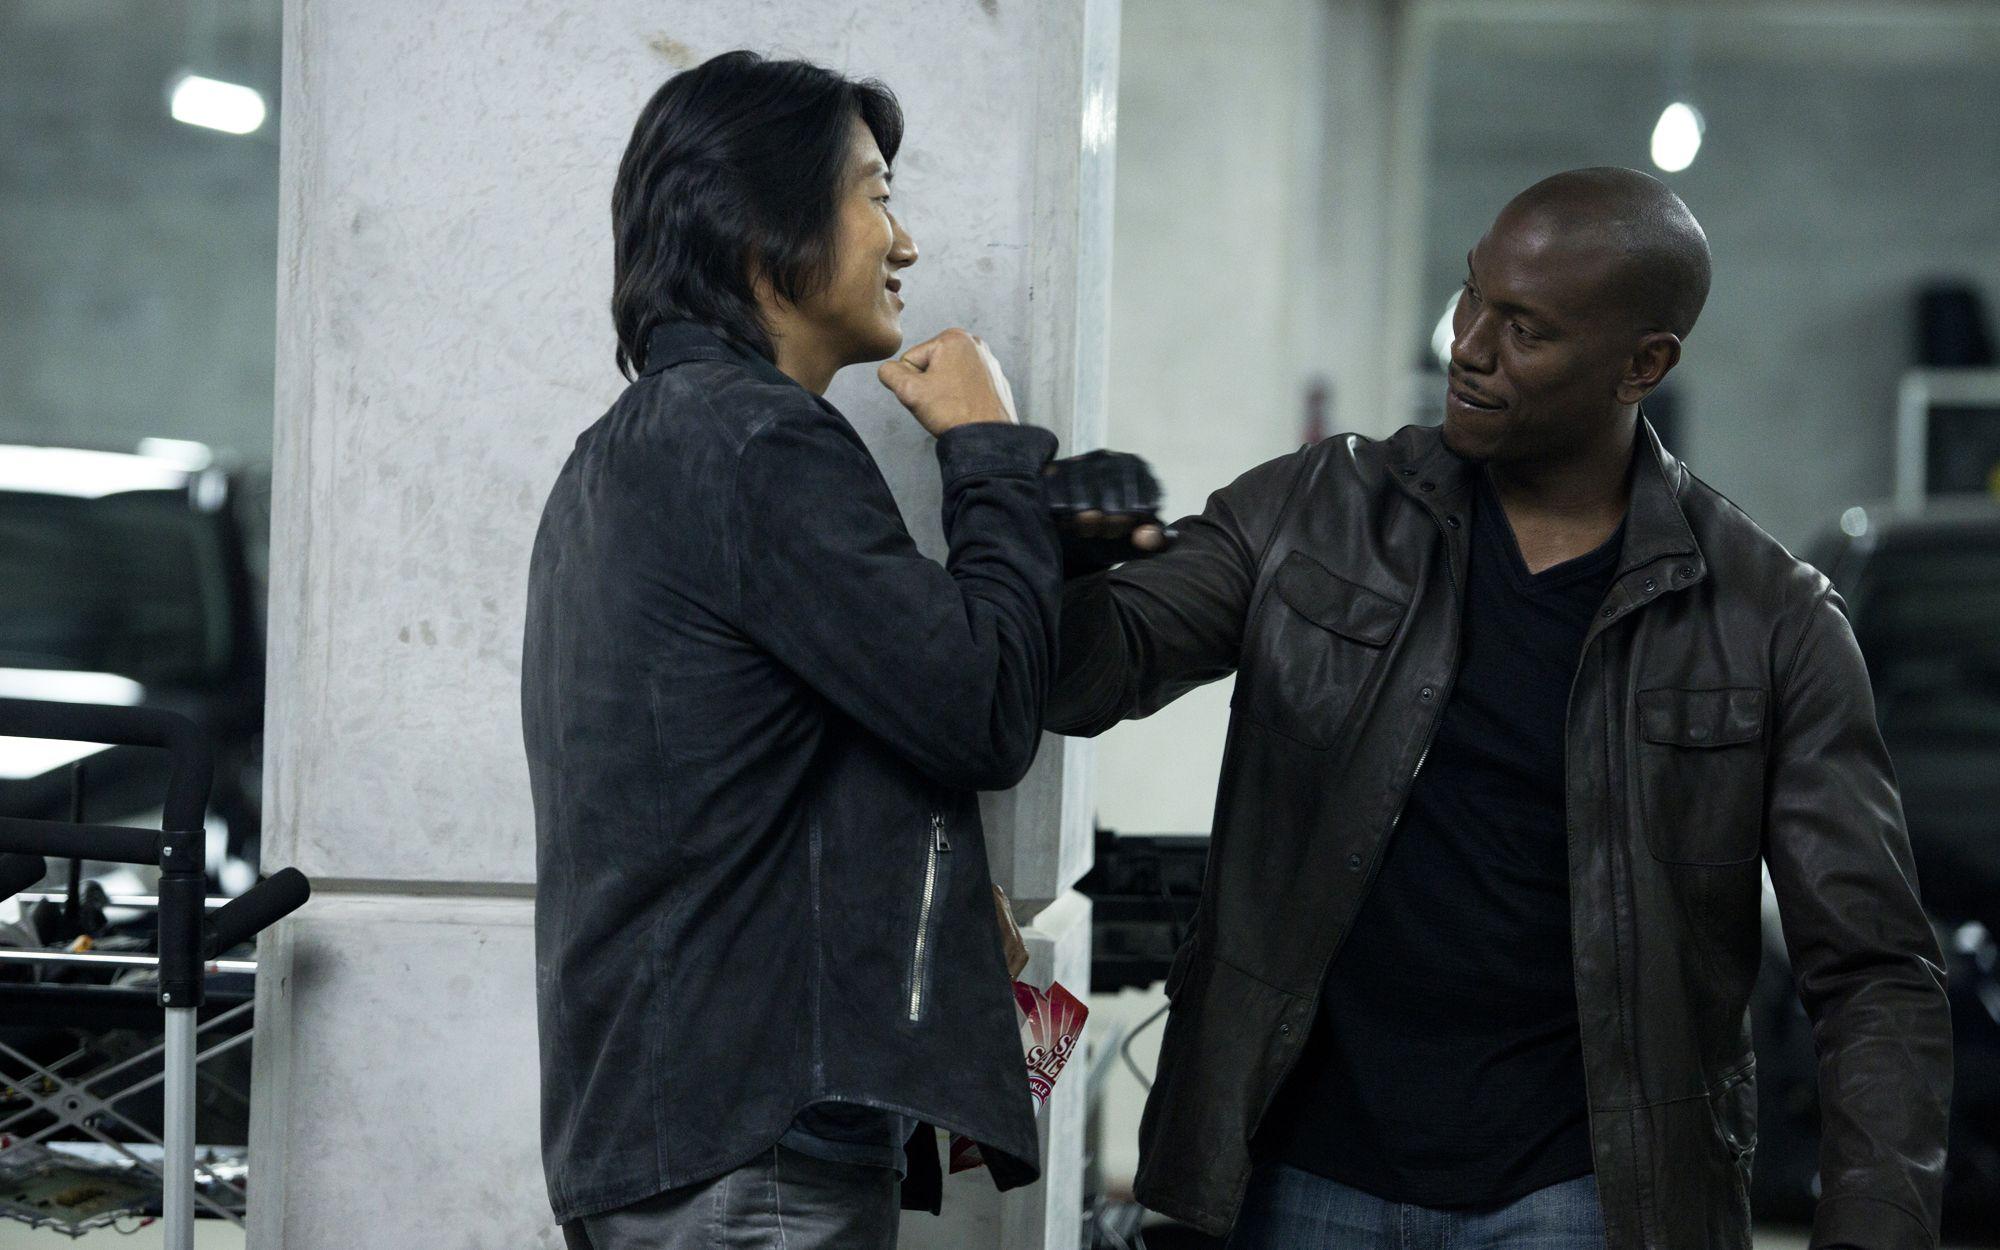 Fast Furious 6 Sung Kang and Tyrese Gibson wallpaper. movies and tv